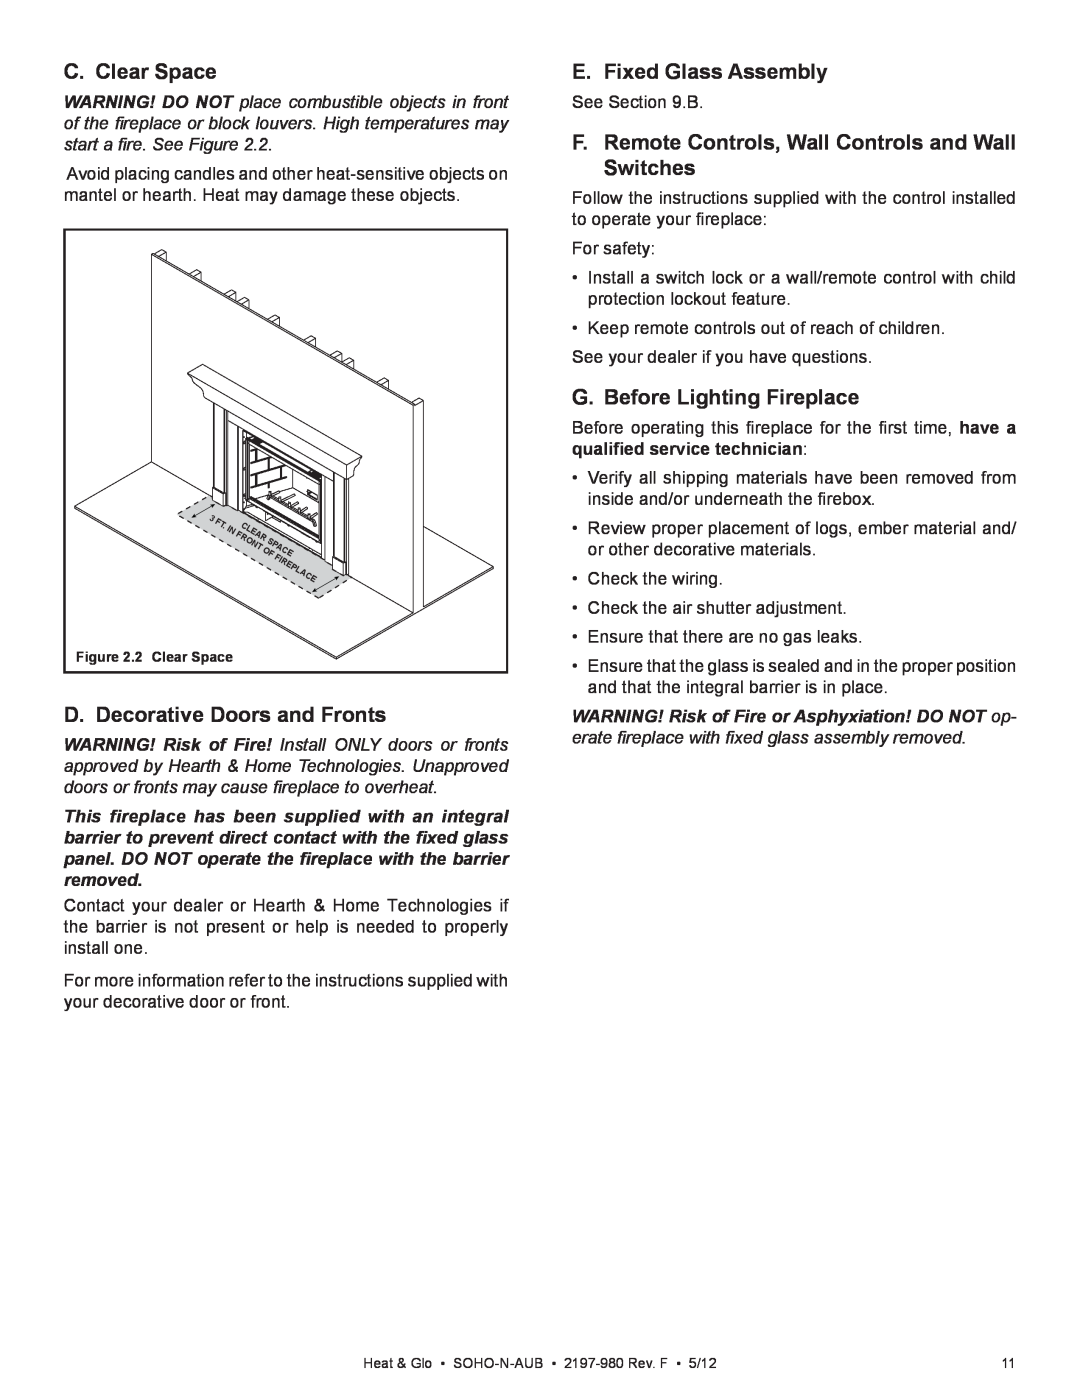 Heat & Glo LifeStyle 2197-980 owner manual C. Clear Space, D. Decorative Doors and Fronts, E. Fixed Glass Assembly 